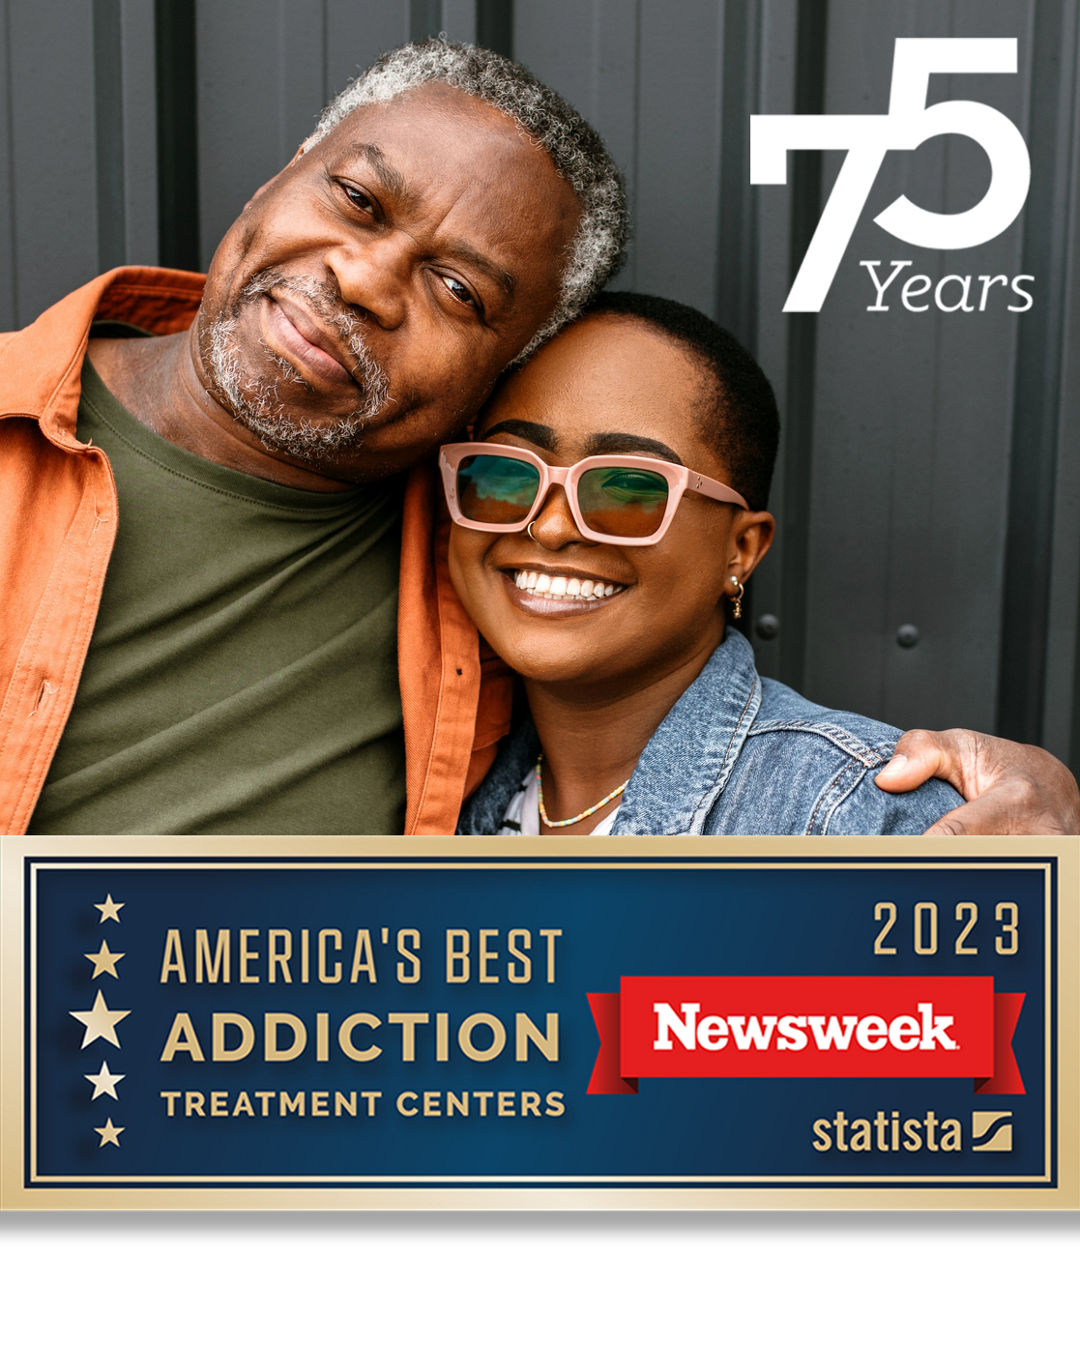 Two adults embracing and the 75th year anniversary logo